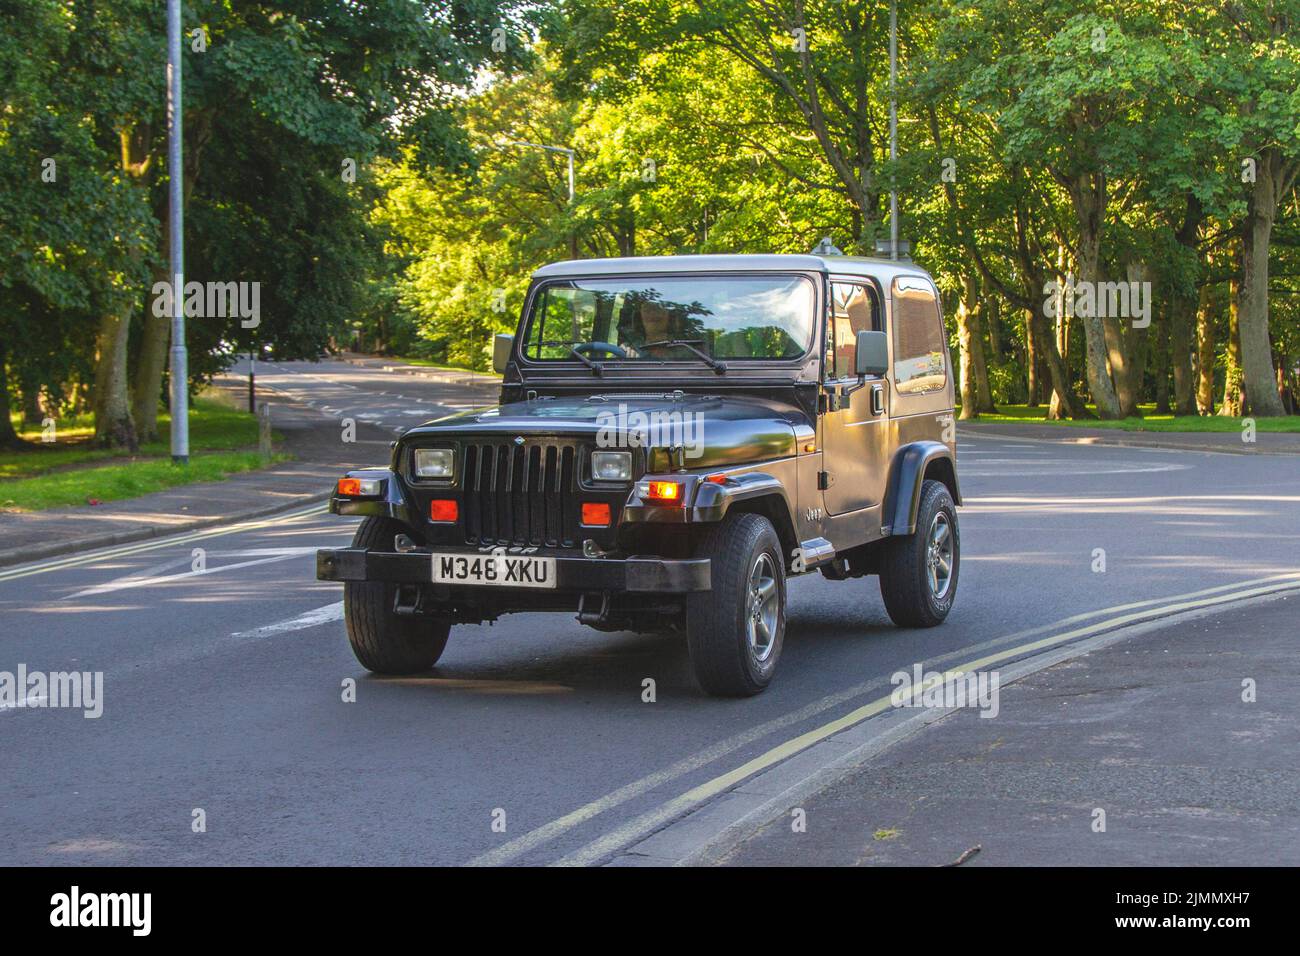 1995 90s nineties Jeep Wrangler 2464cc 5 speed manual; en-route to Lytham Hall classic car show, Lancashire, UK Stock Photo